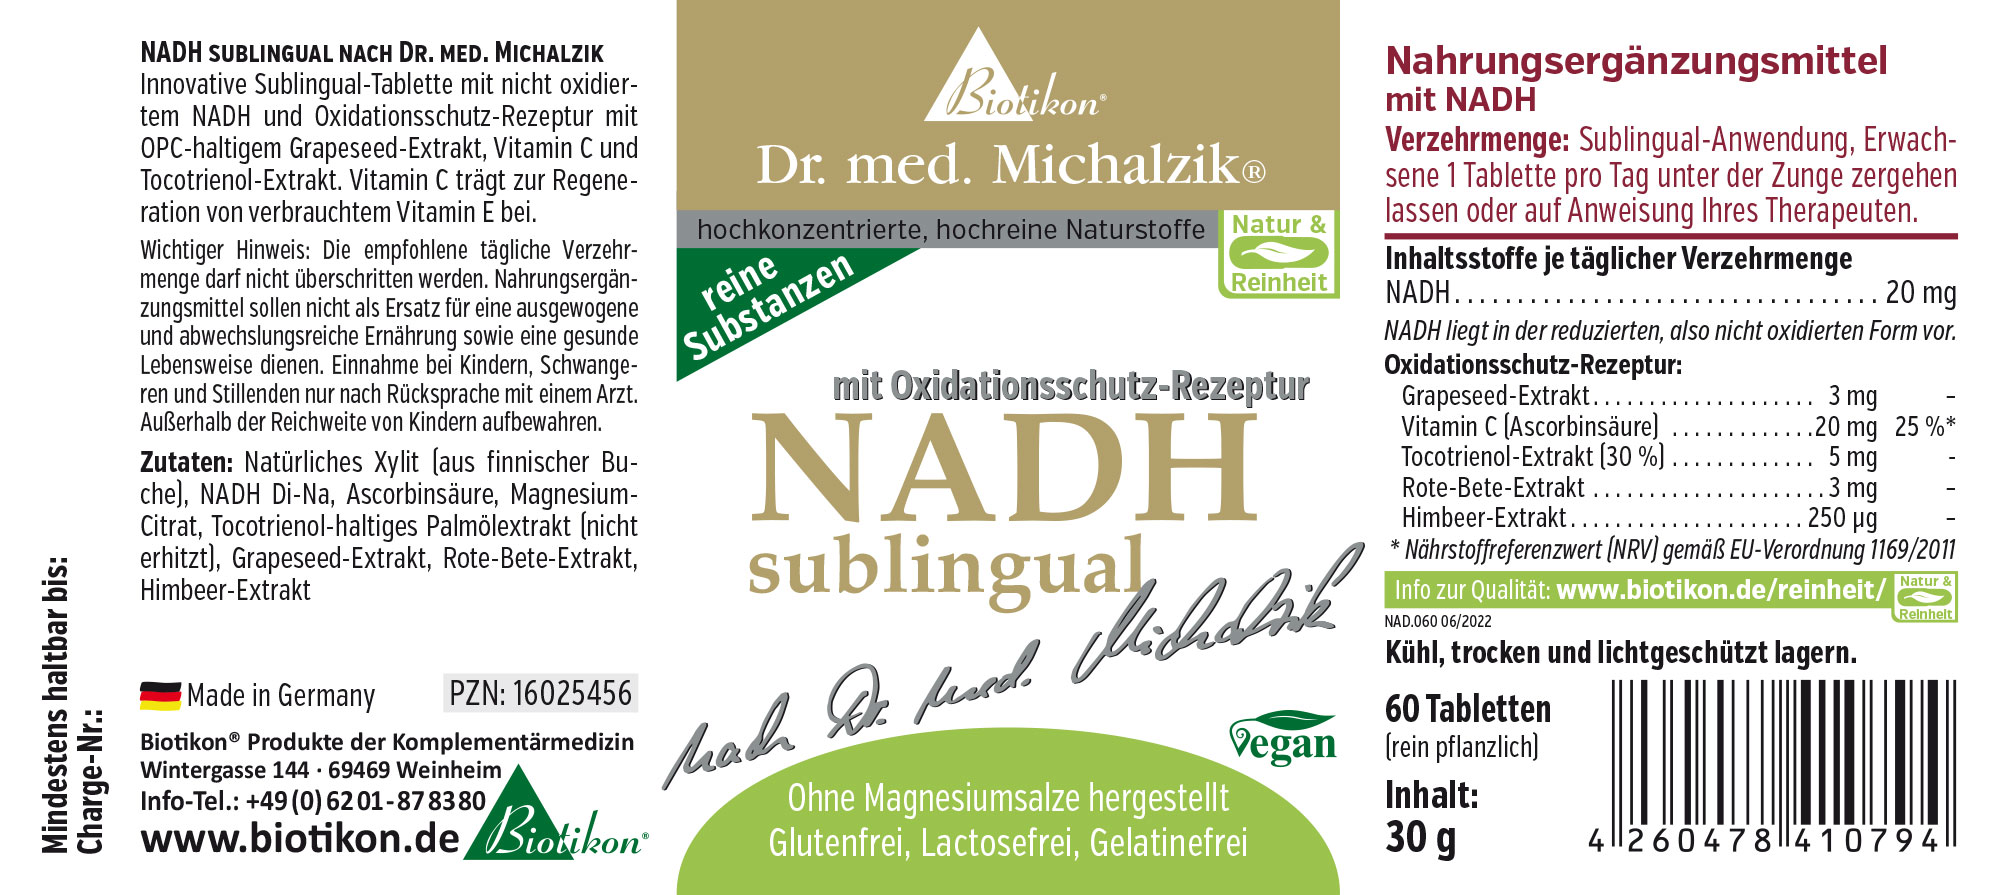 NADH sublingual